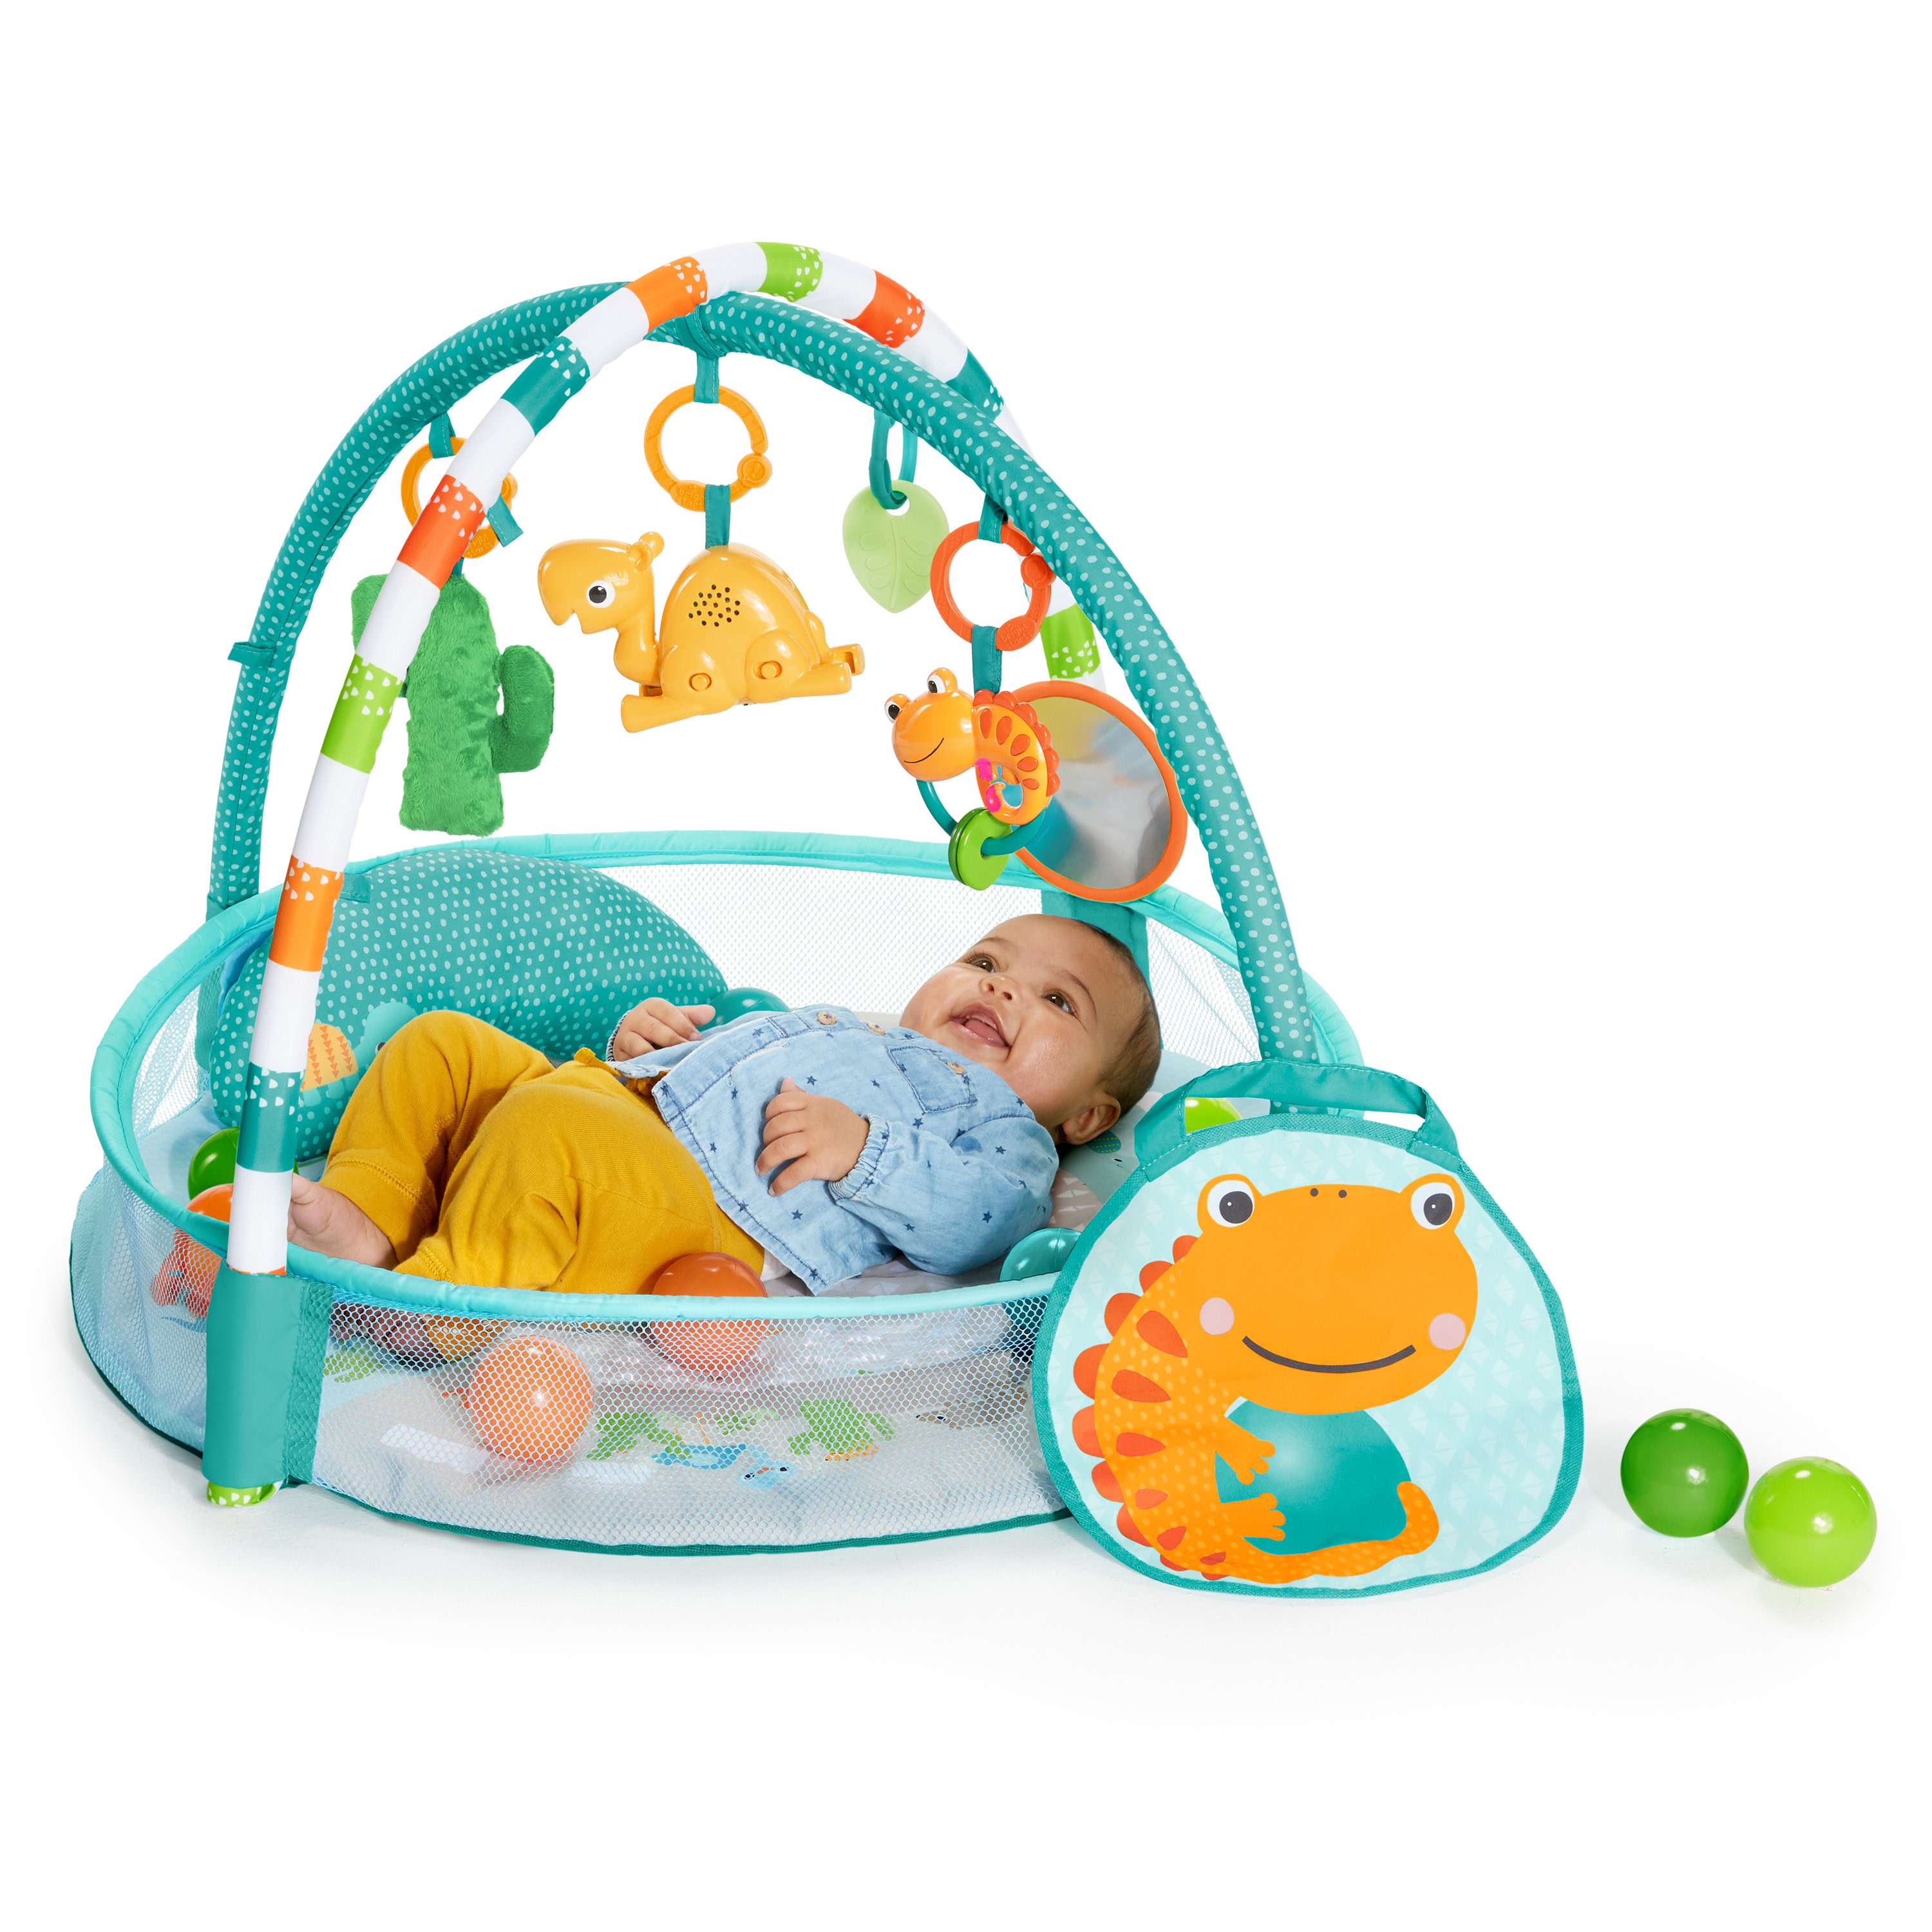 Bright Starts - Rounds Of Fun Baby Infant Activity Play Gym, Blue (11979)